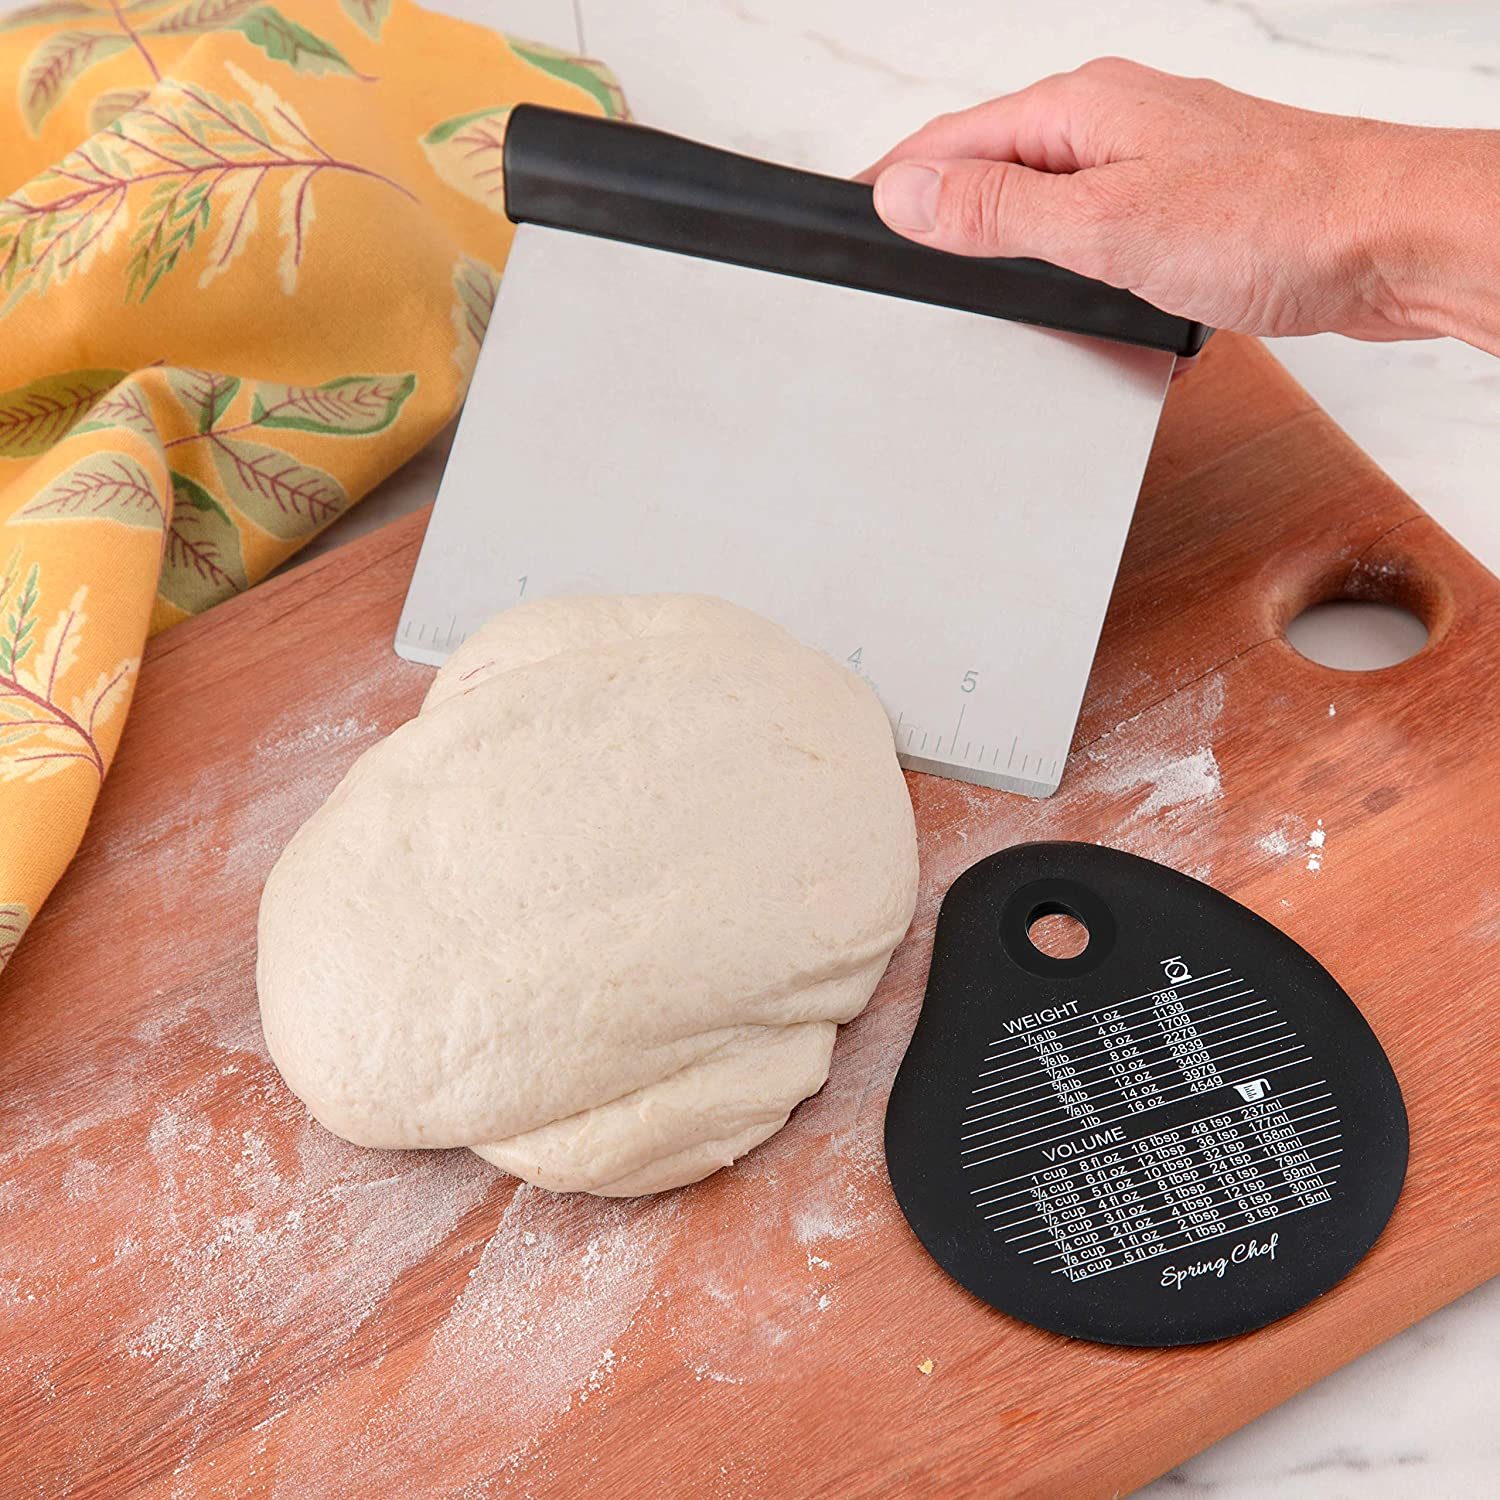 The Best Pizza Making Tools You Can Buy